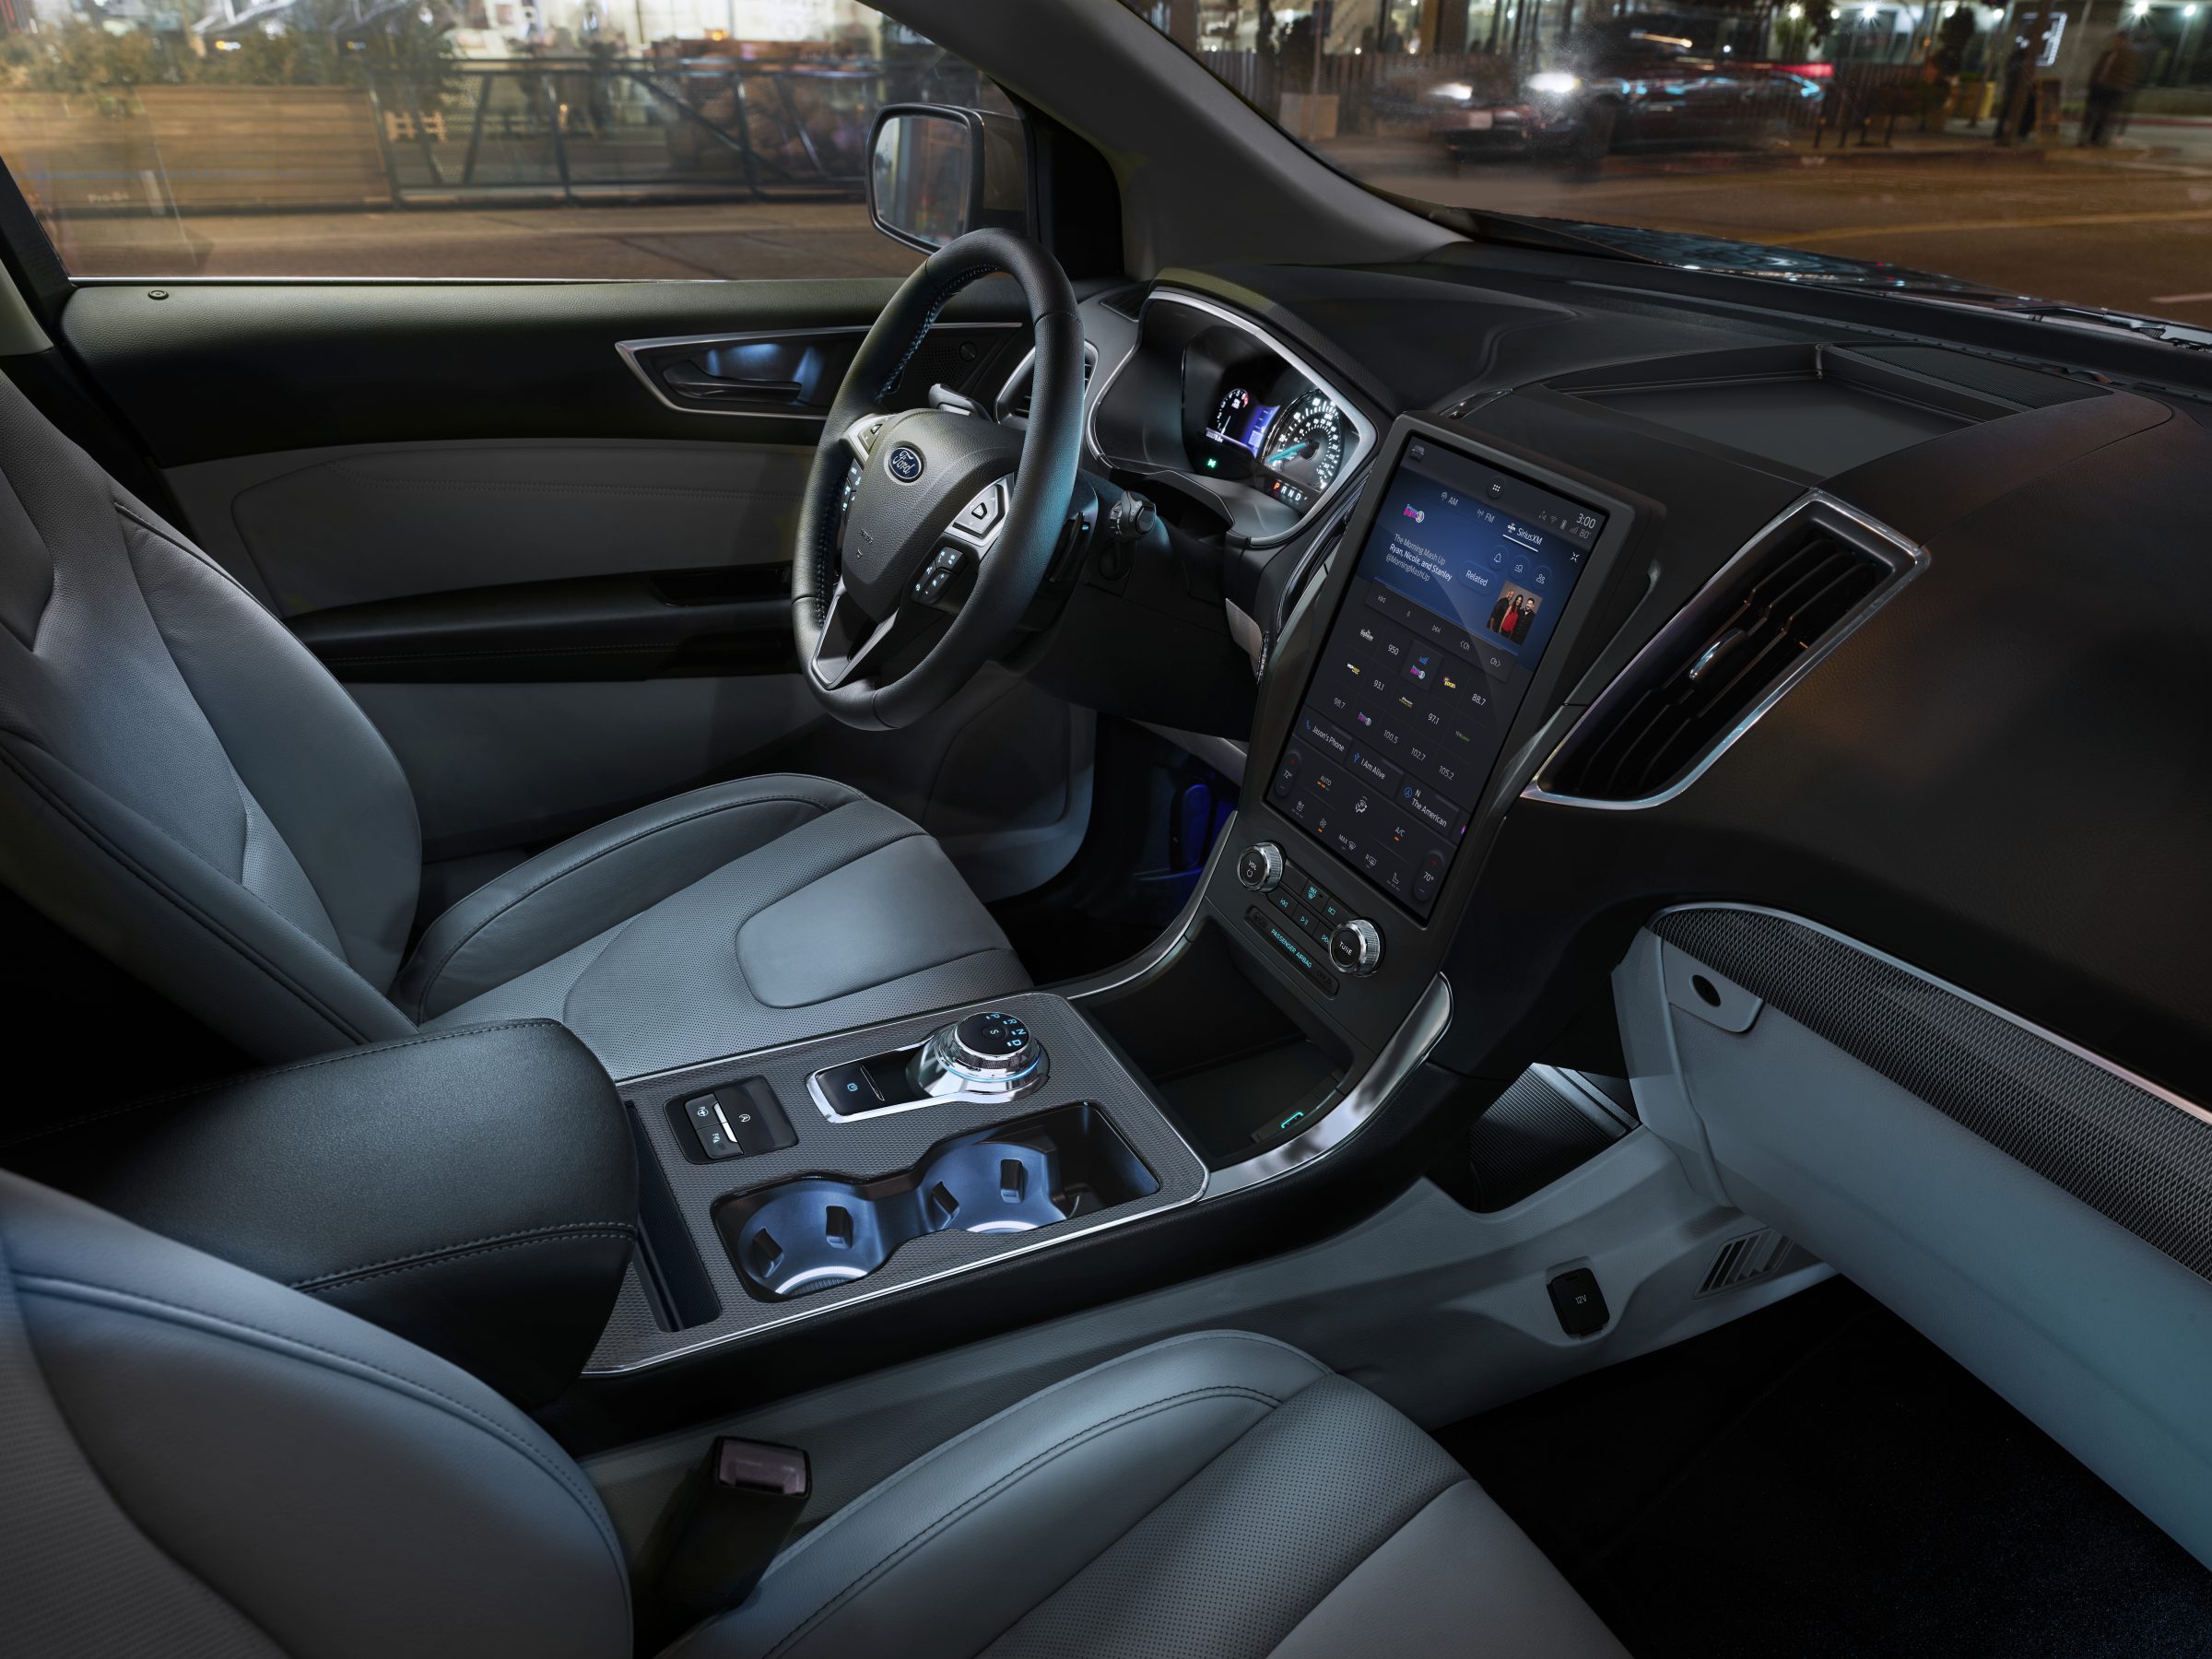 FORD EDGE SUV front seats